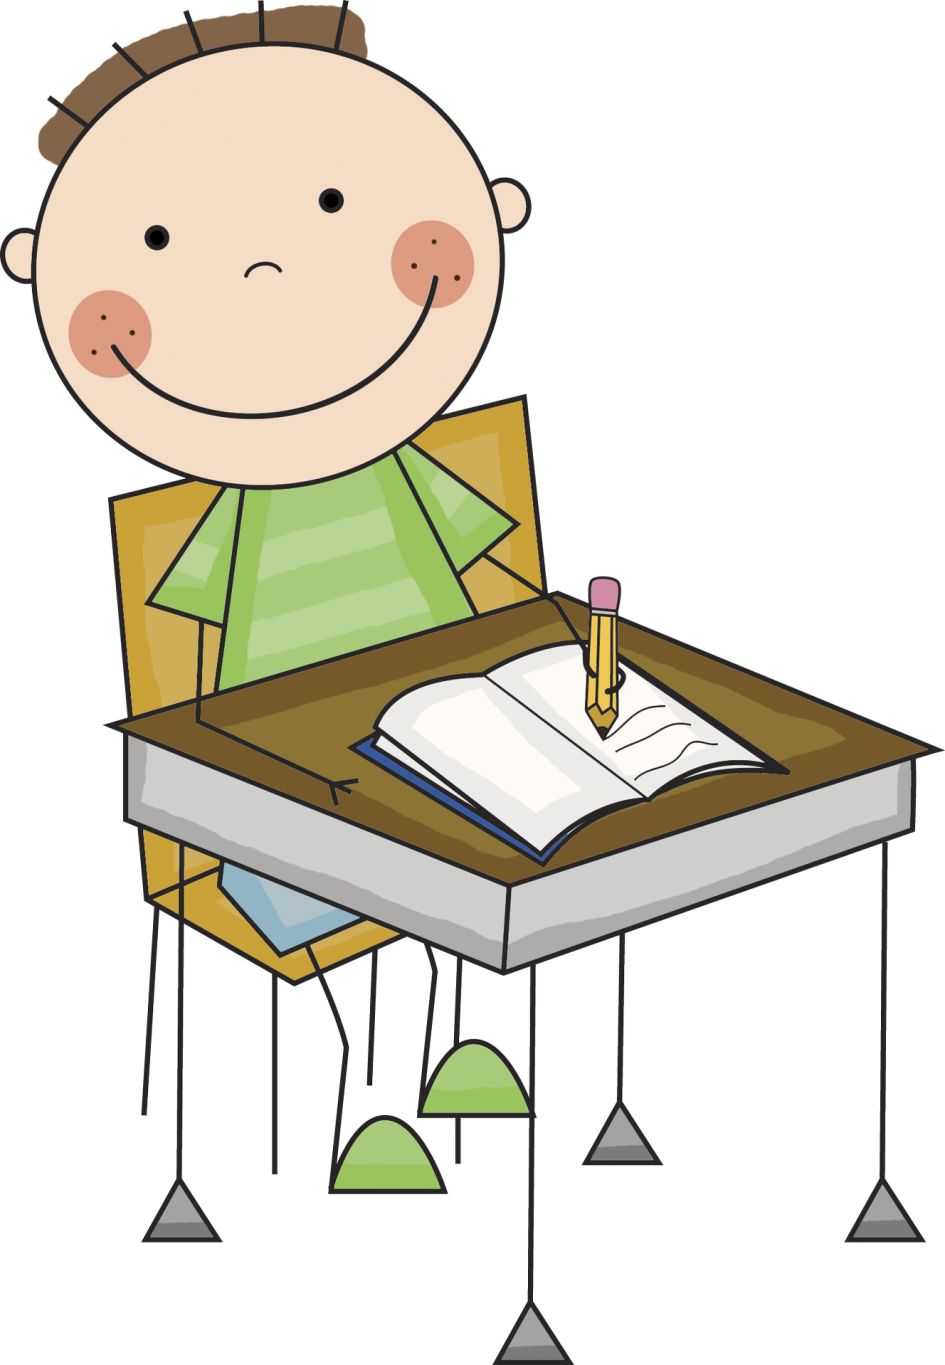 Clip art for the. Handwriting clipart crayon